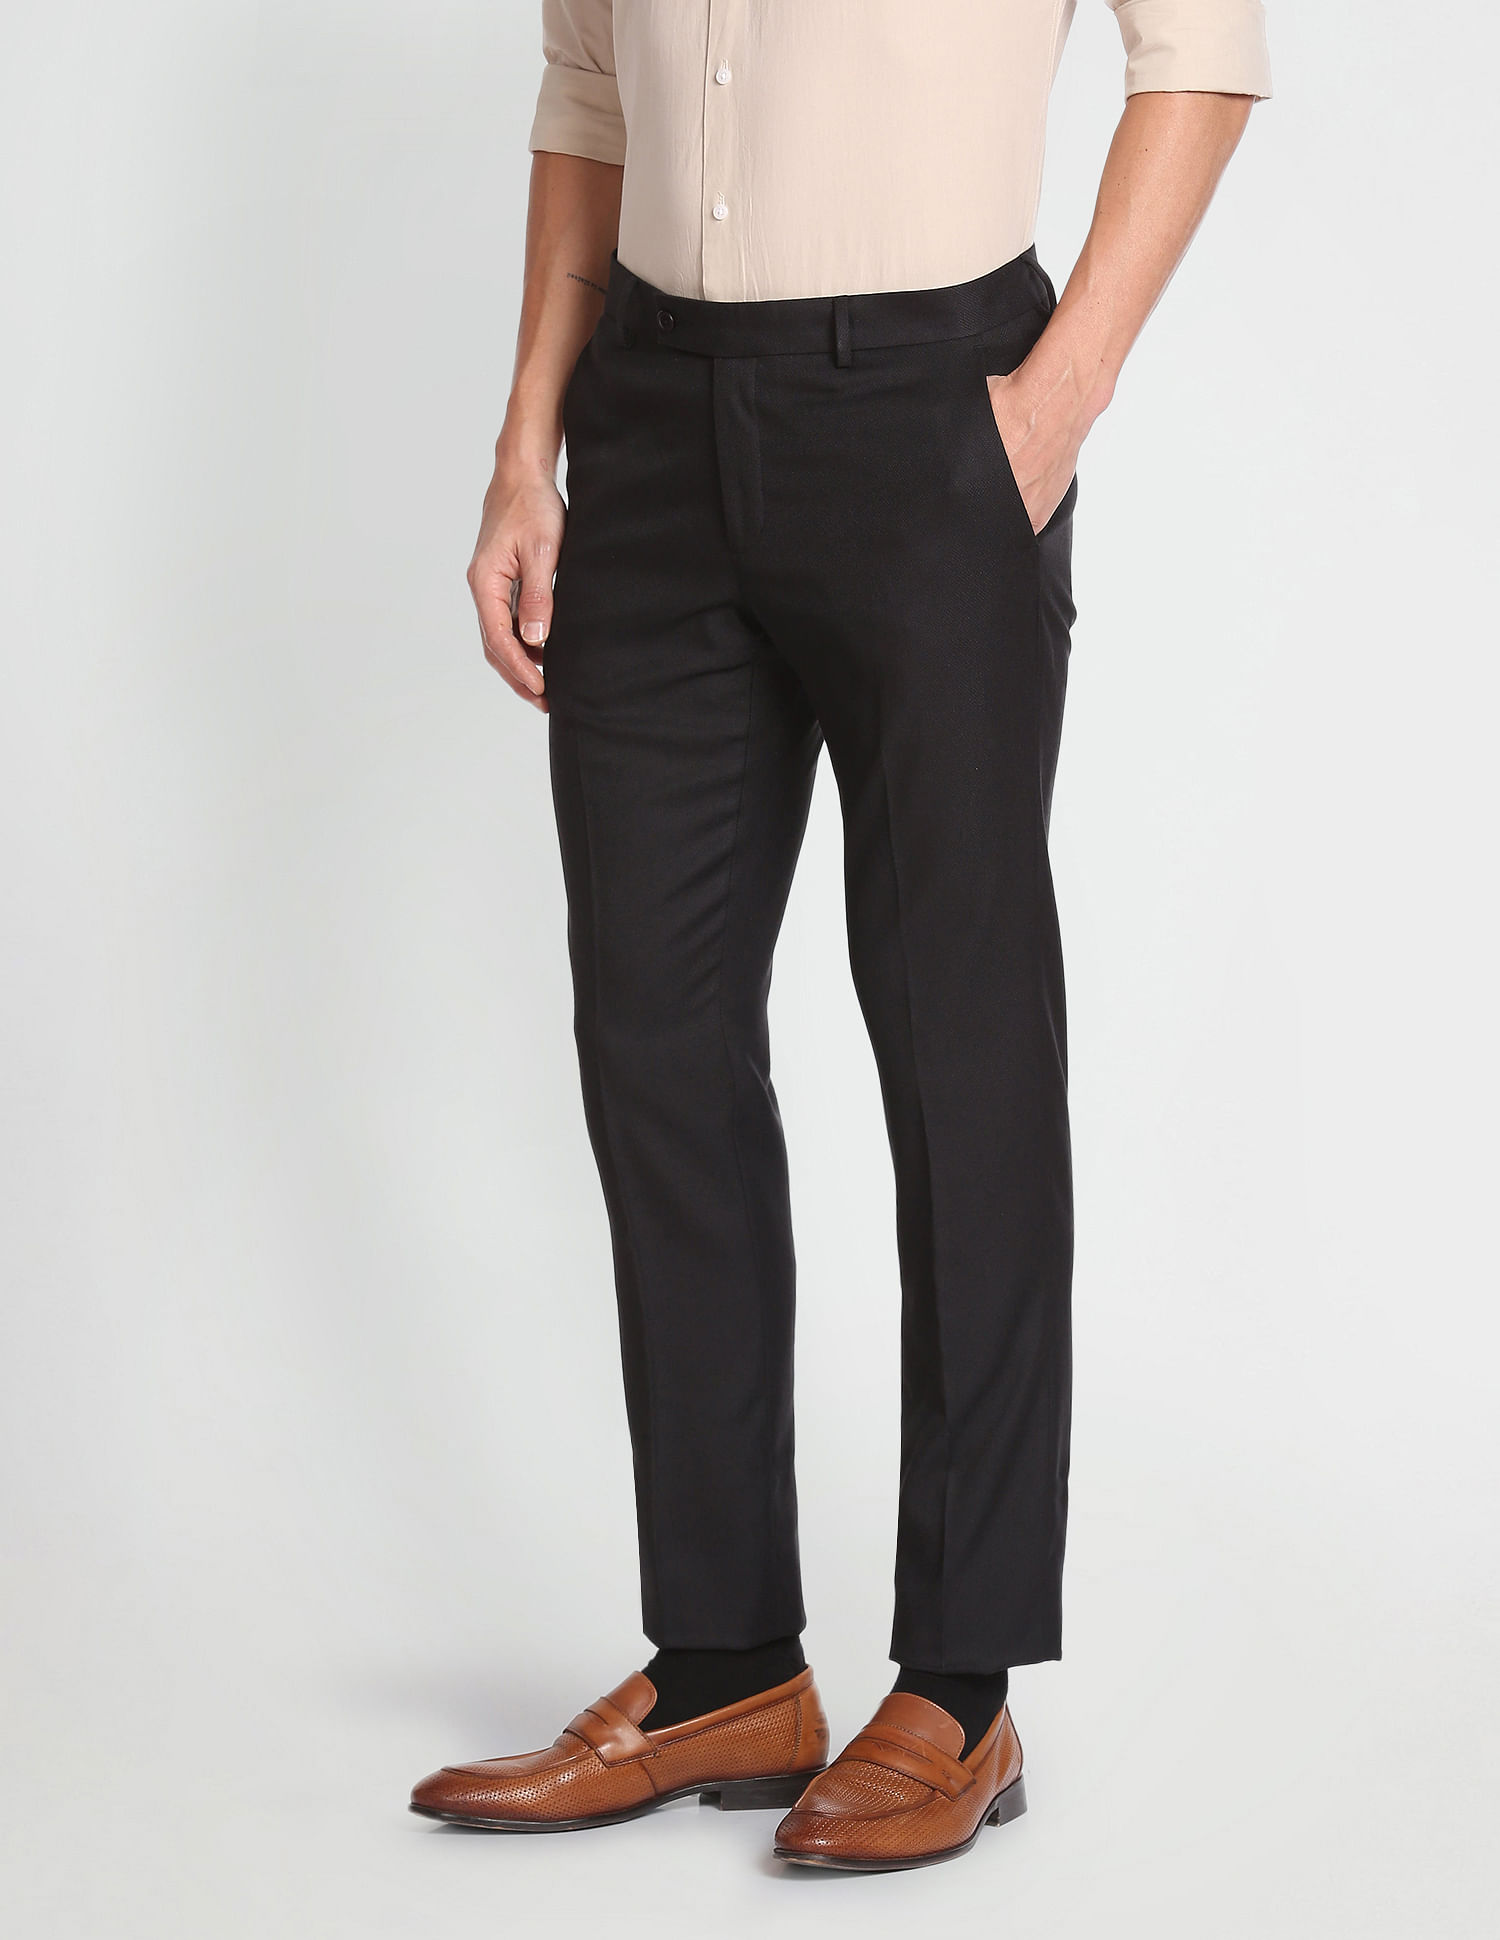 Buy Set of 2 Semi Formal Trousers + 1 Denim Online at Best Price in India  on Naaptol.com